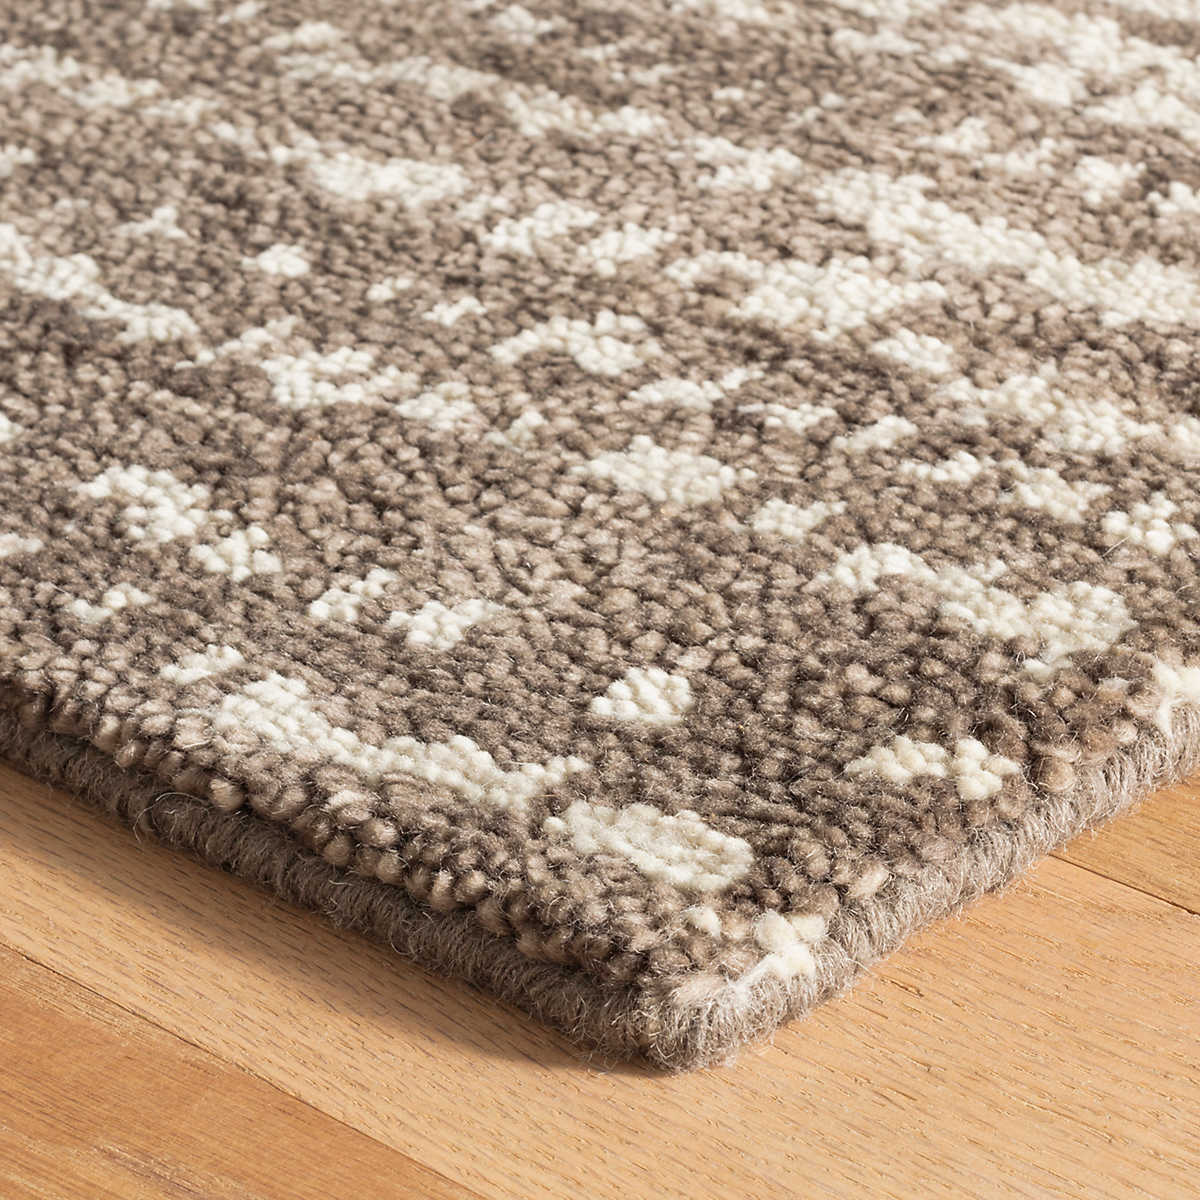 The Shepherd Grey Rug deeply dense and cushy pile serves to highlight the beauty of the unbleached color variations of natural wool fleece. The random stippling of irregularly shaped splotches is a signature motif of Marie Flanigan, an award-winning interior designer. Amethyst Home provides interior design services, furniture, rugs, and lighting in the Miami metro area.